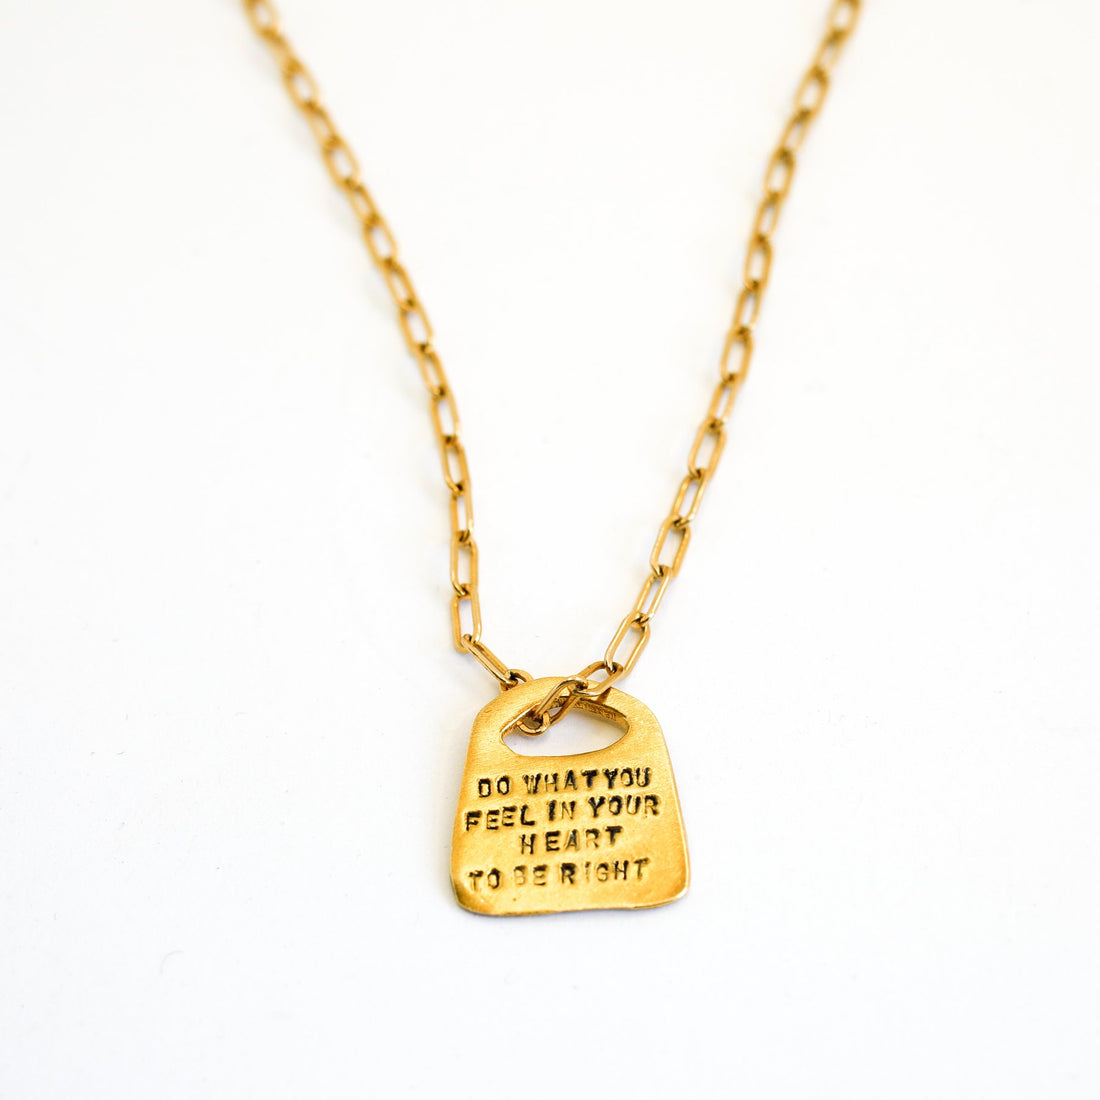 Eleanor Roosevelt Rune Necklace "Do what you feel in your heart to be right, for you'll be criticized anyway." - Chocolate and Steel